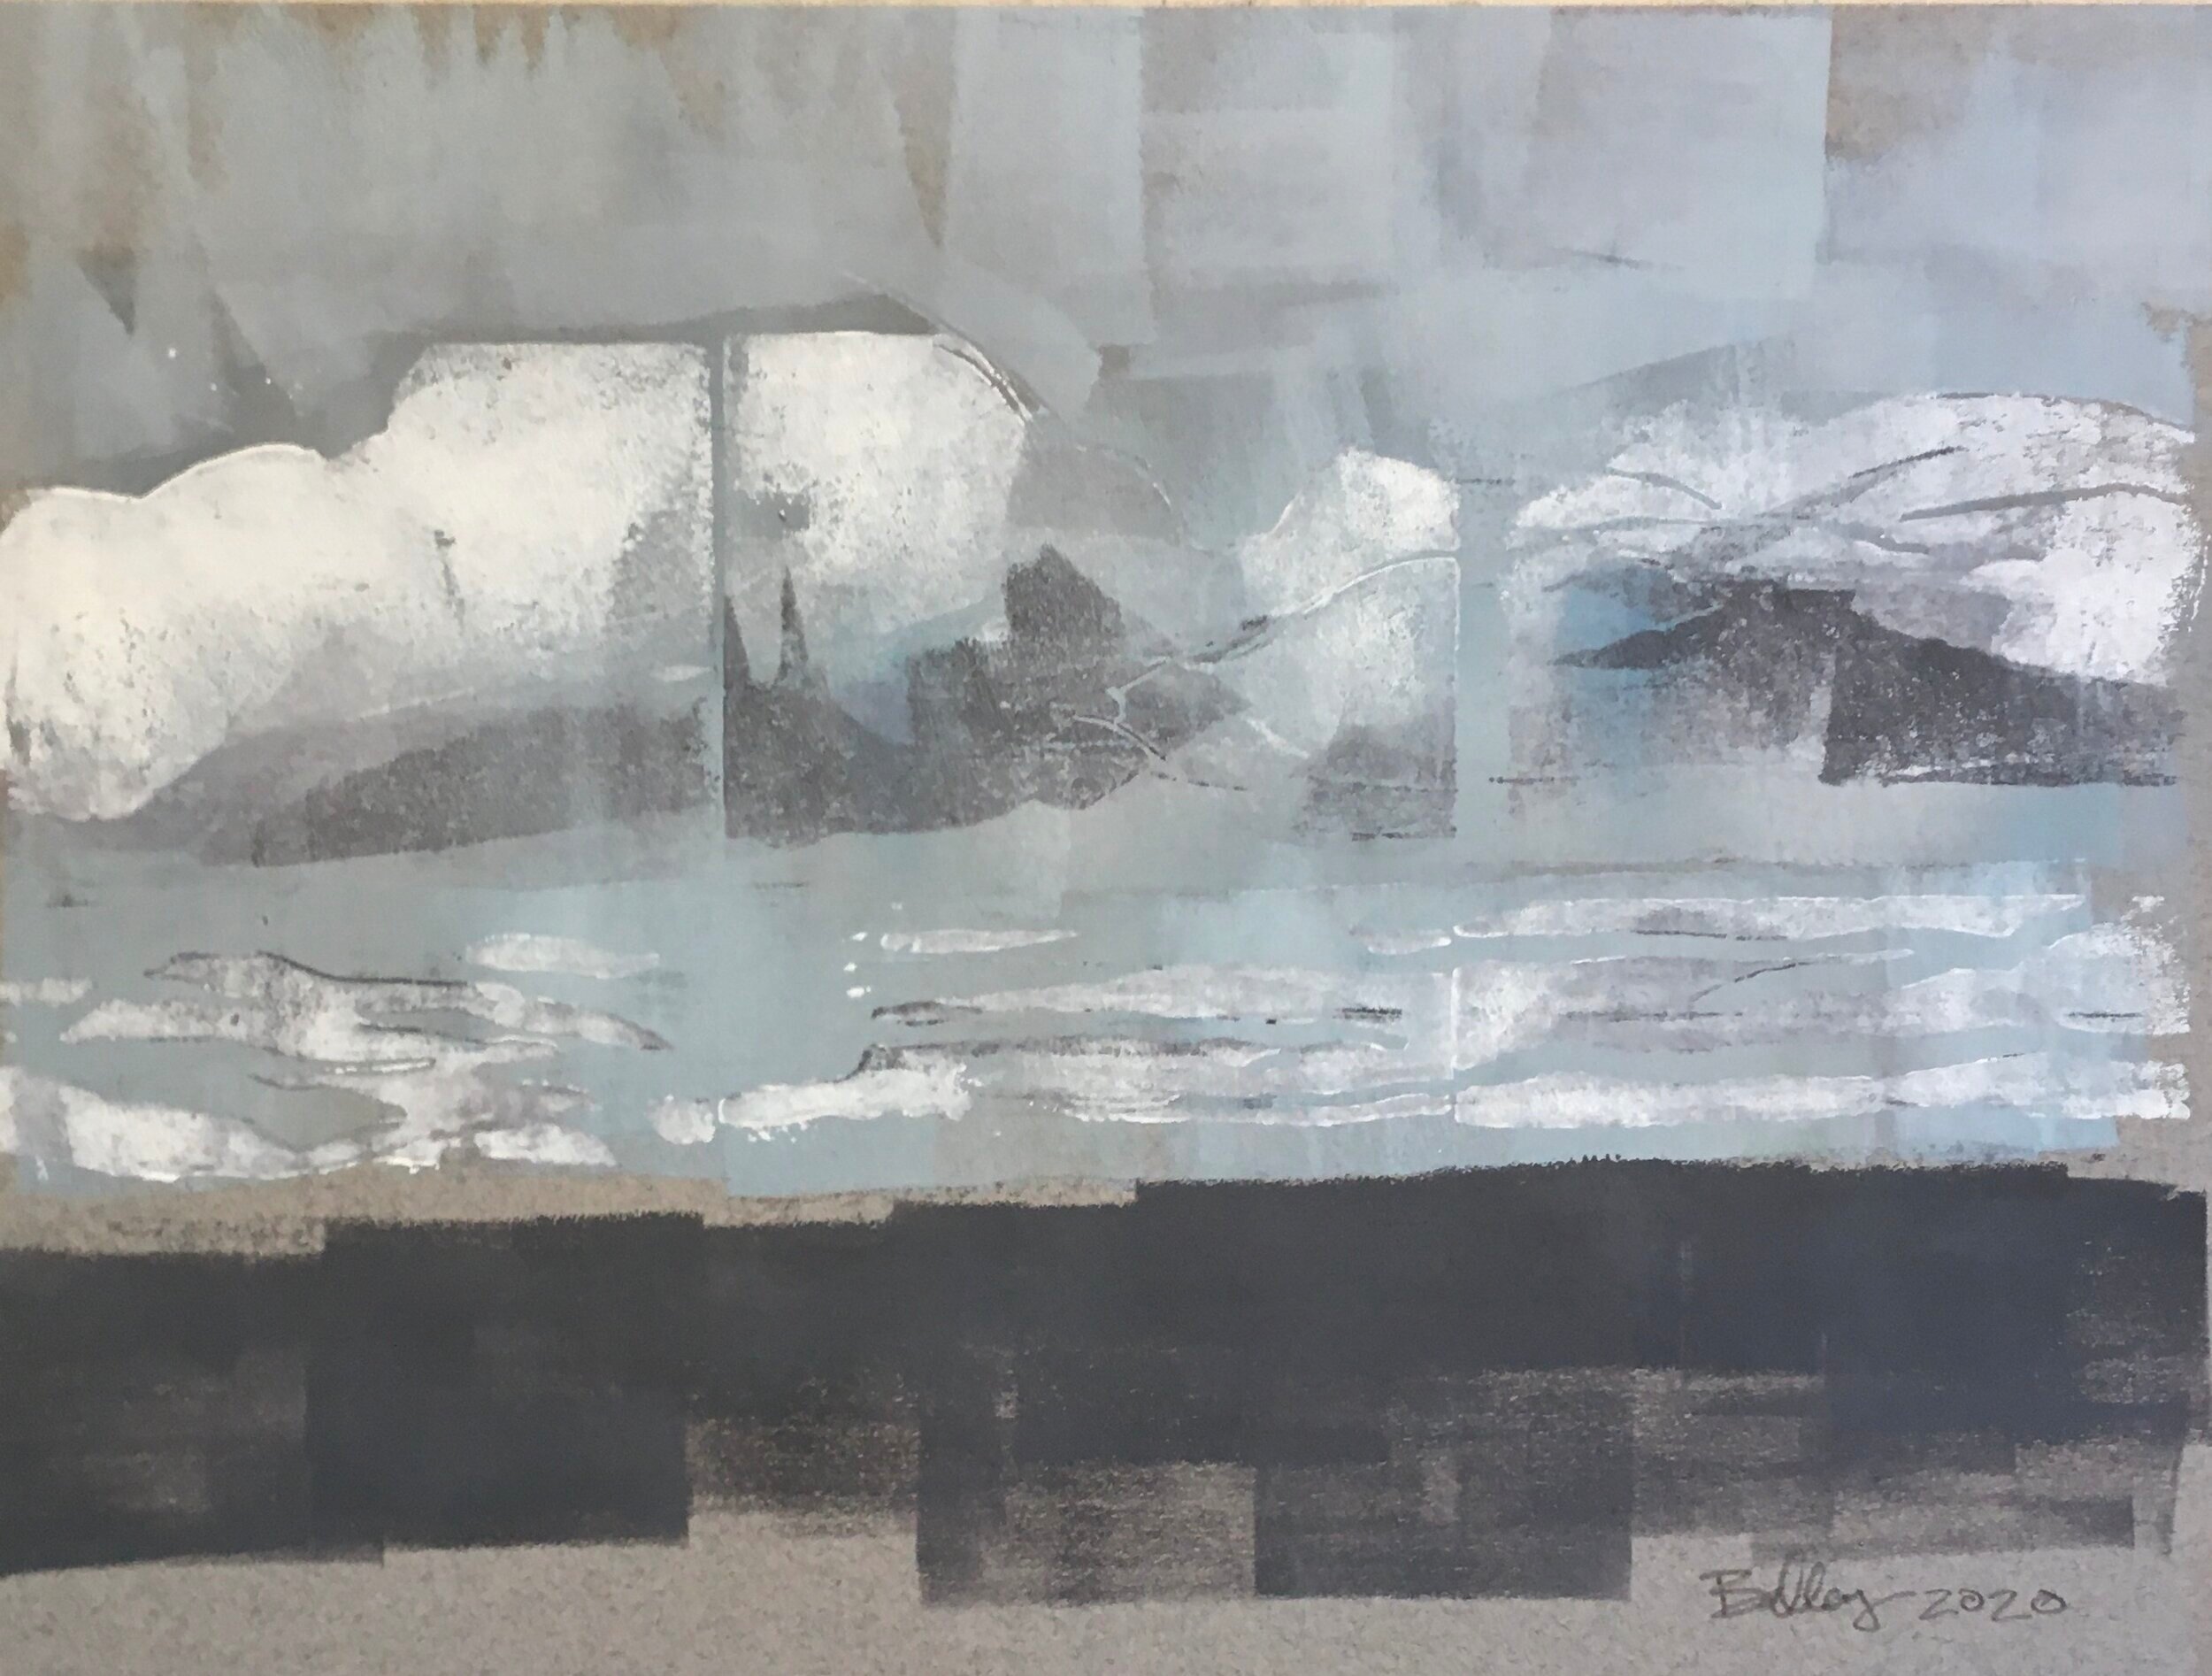 Cloud Scape #4, Block Print, 9 by 12 inches, J.Ballay, 2020.